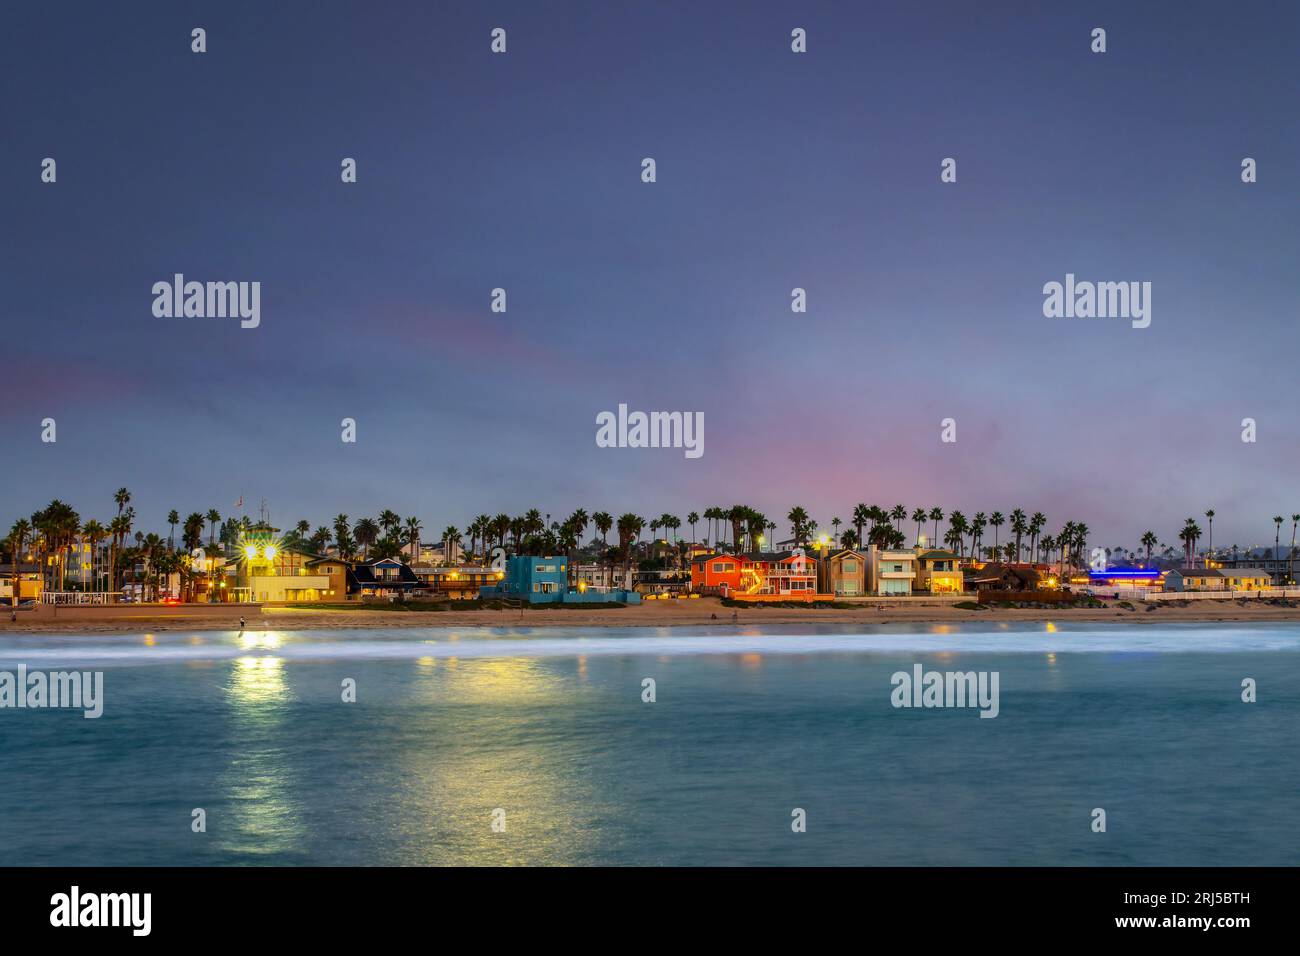 Colorful houses at night on Imperial beach in San Diego, California Stock Photo